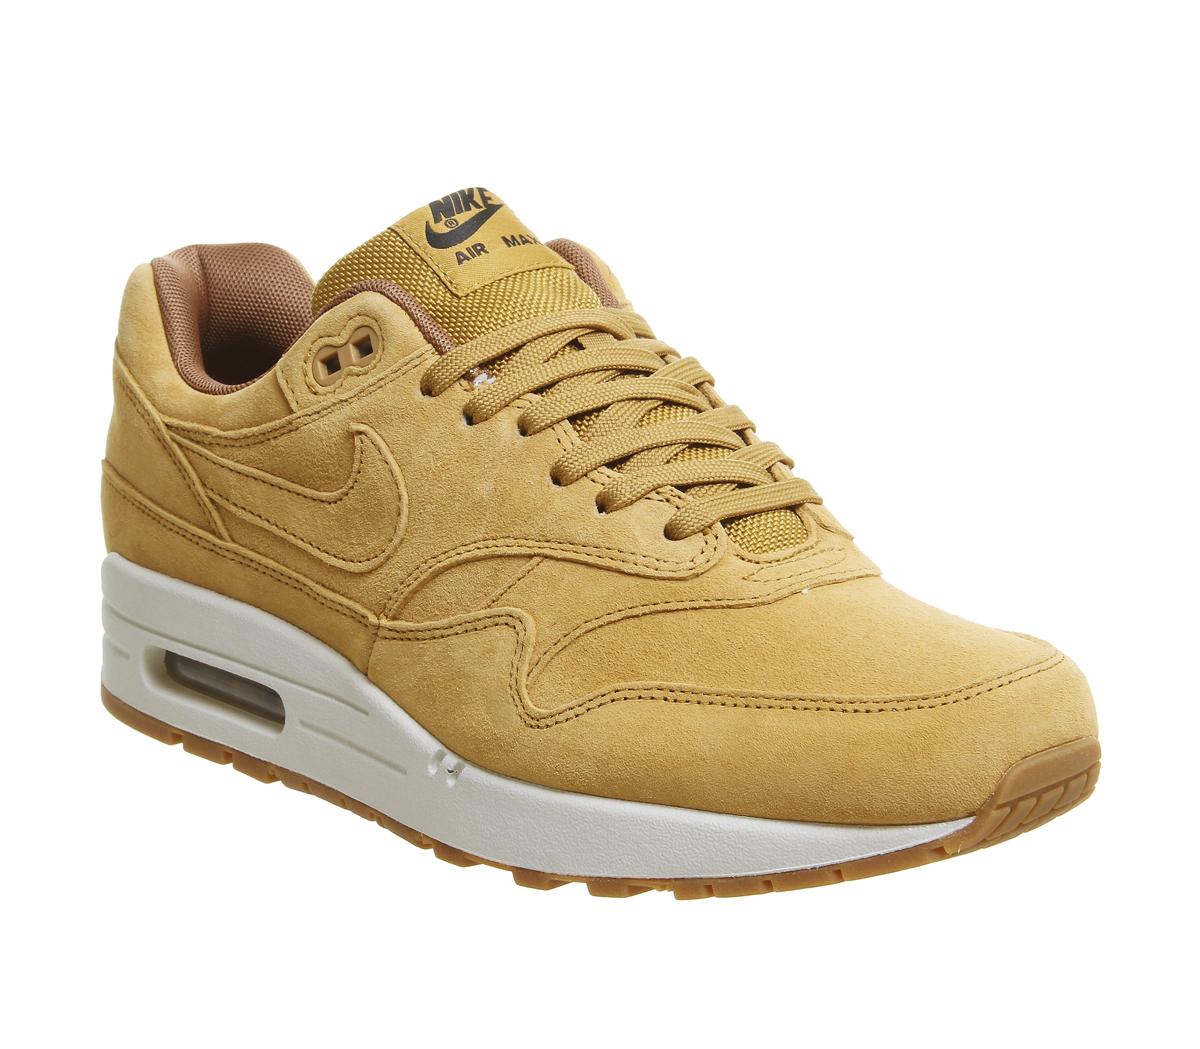 Wheat Gold Air Max 1 Online Sale, UP TO 